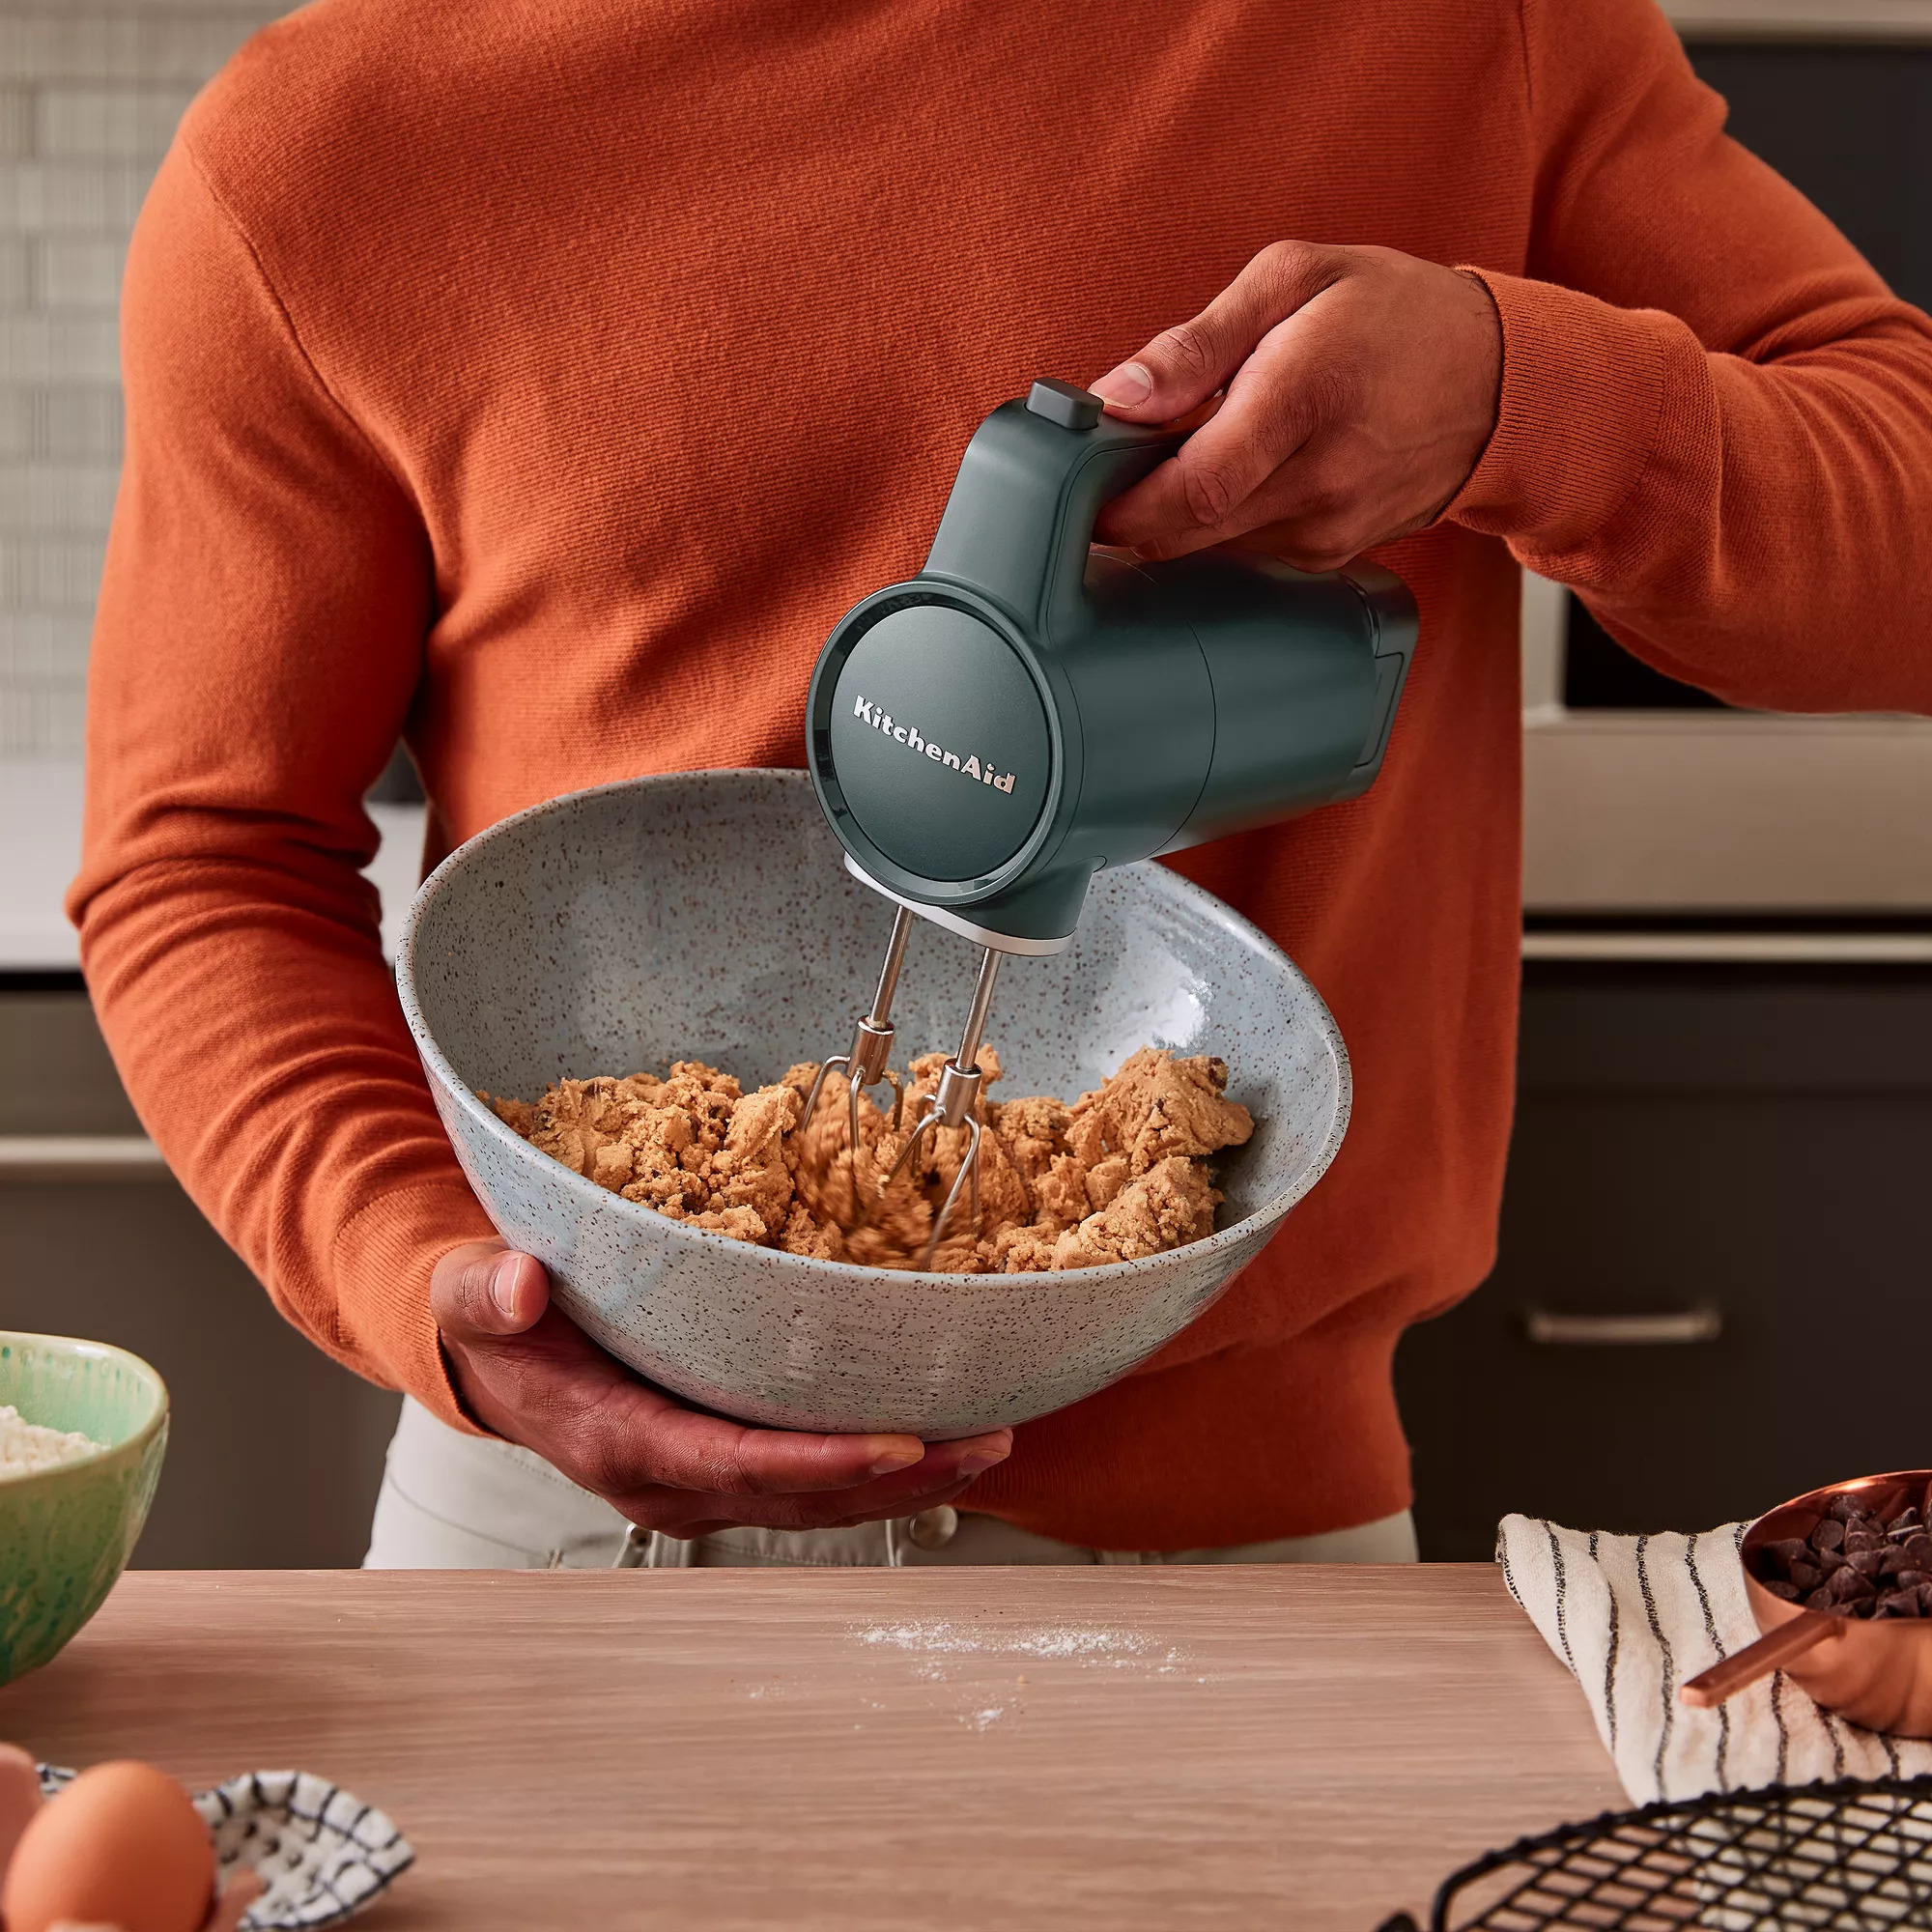 A person using the cordless mixer in a dark green